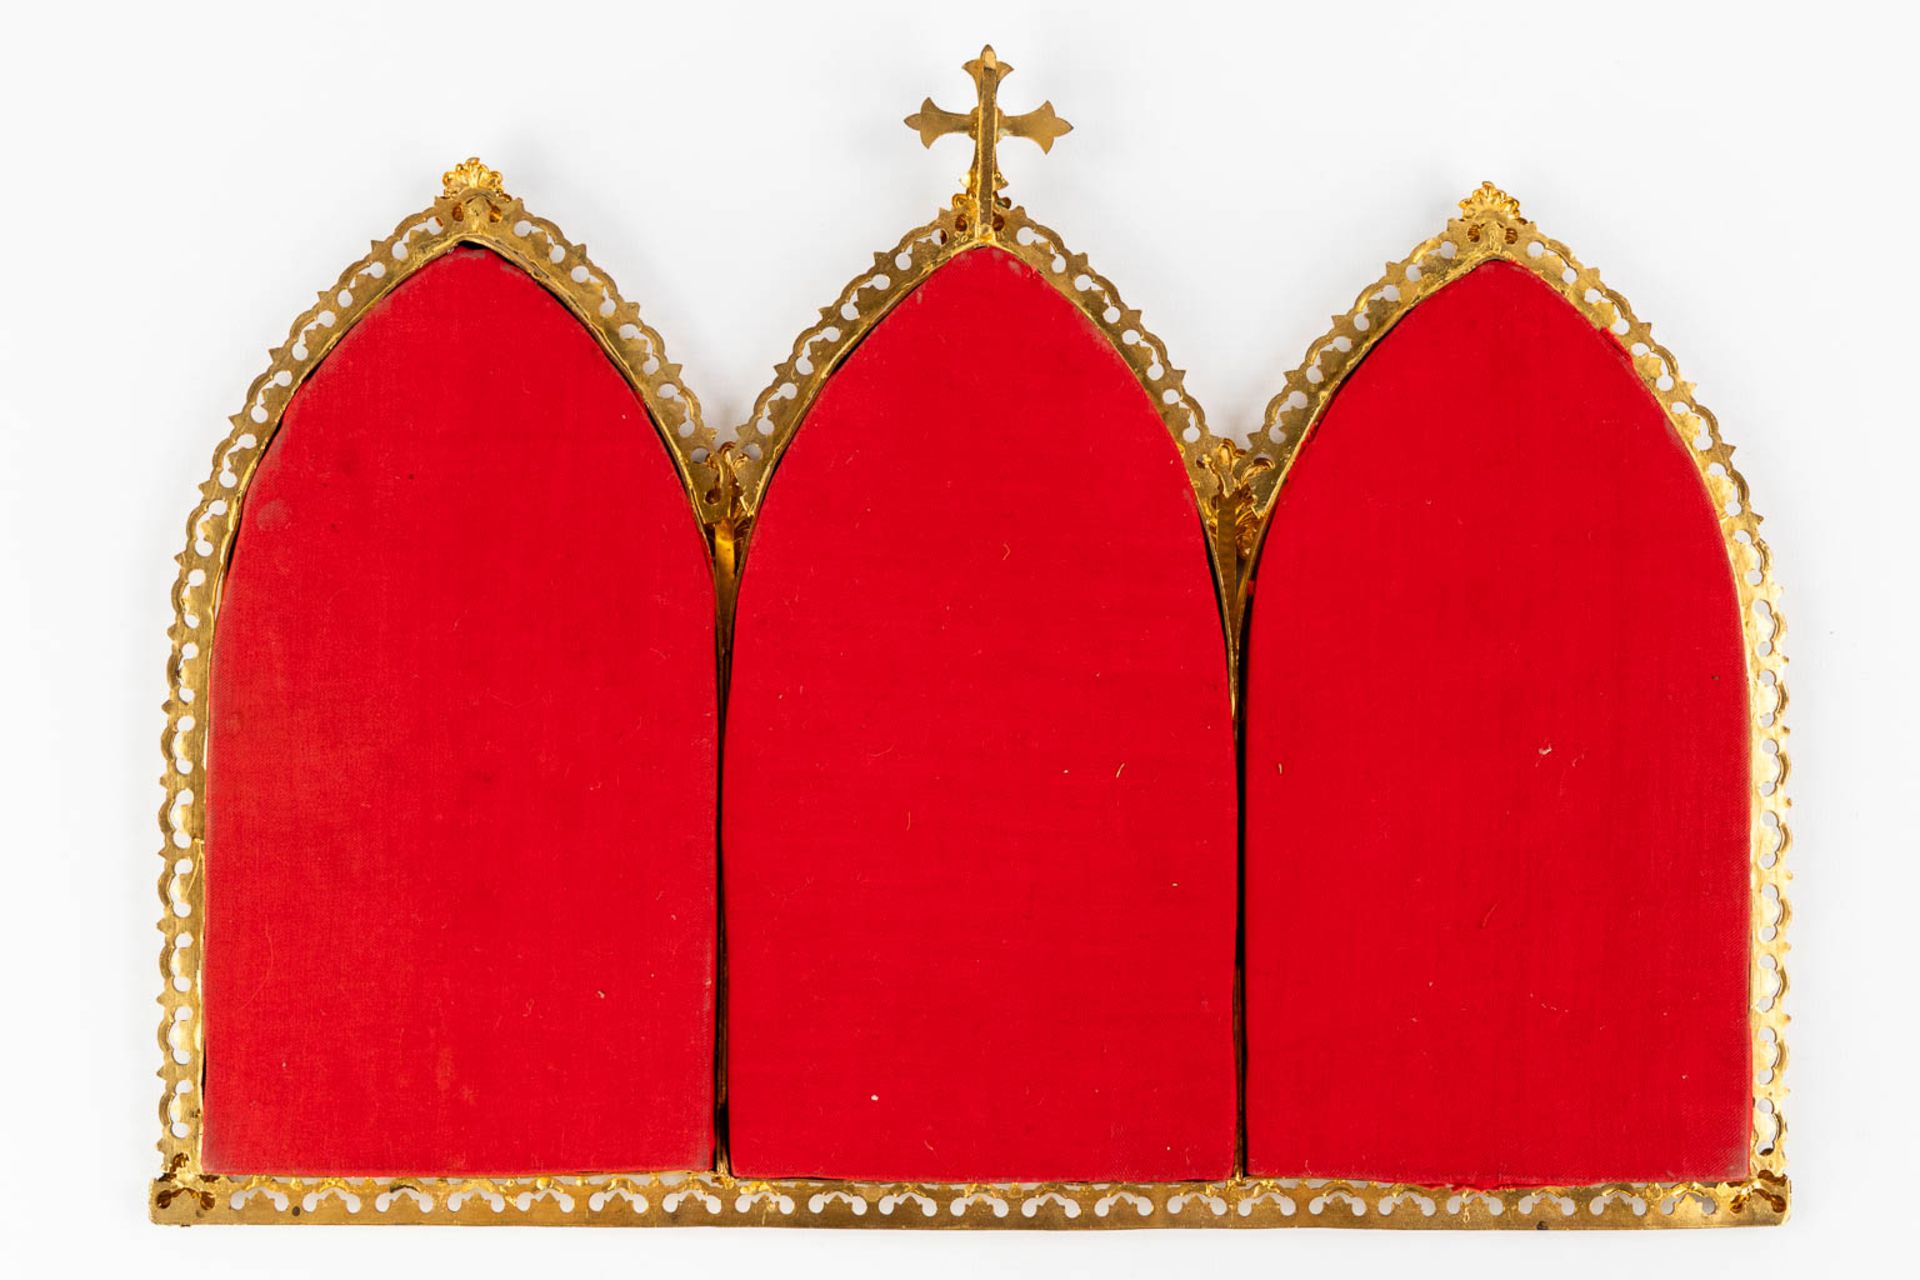 A set of 'Canon Boards' gilt brass in Gothic Revival style. 20th C. (W:43 x H:31 cm) - Image 9 of 9